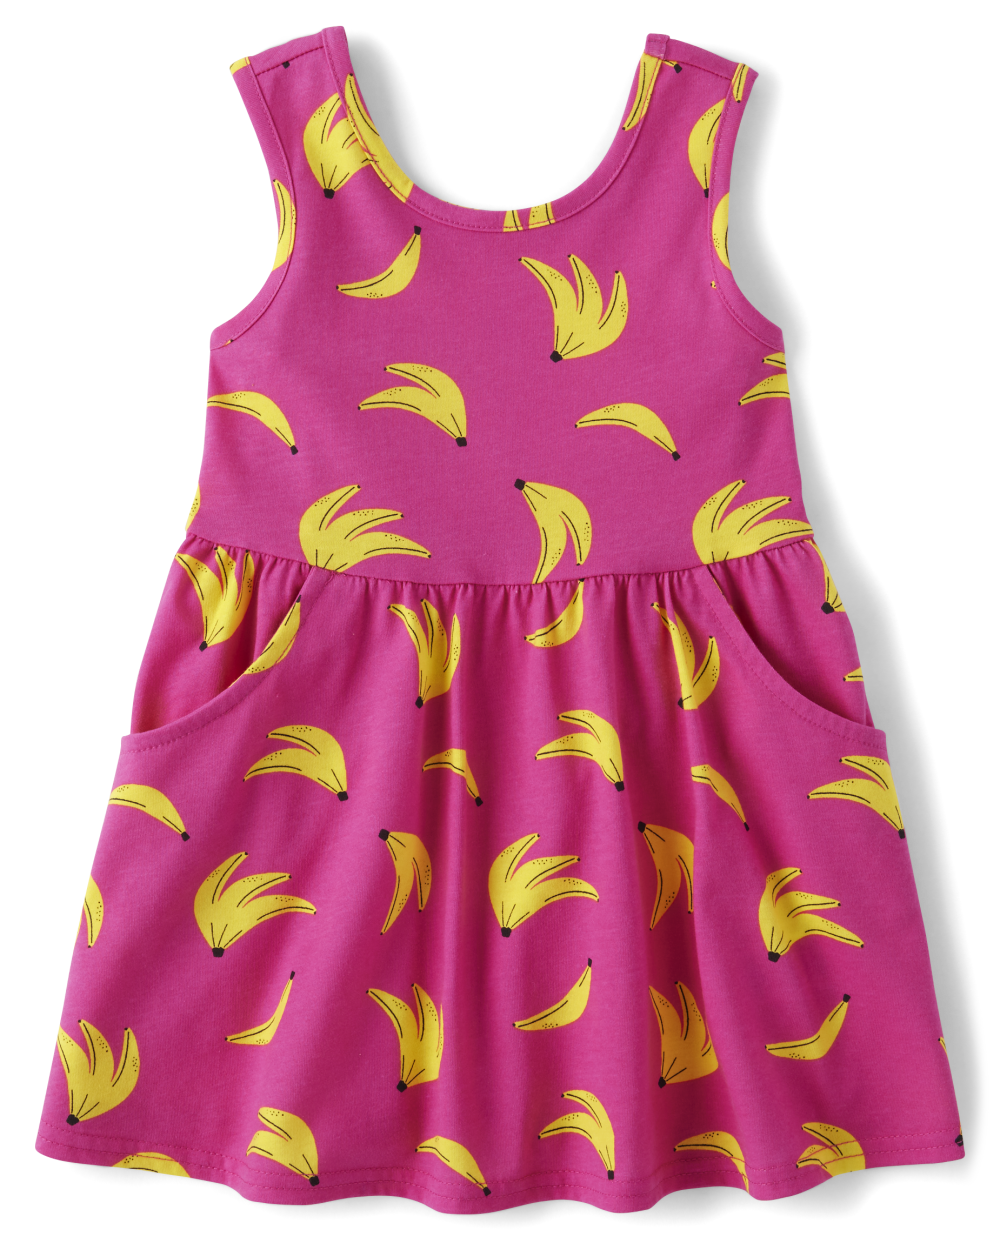 Toddler Baby Pocketed General Print Sleeveless Tank Above the Knee Scoop Neck Dress